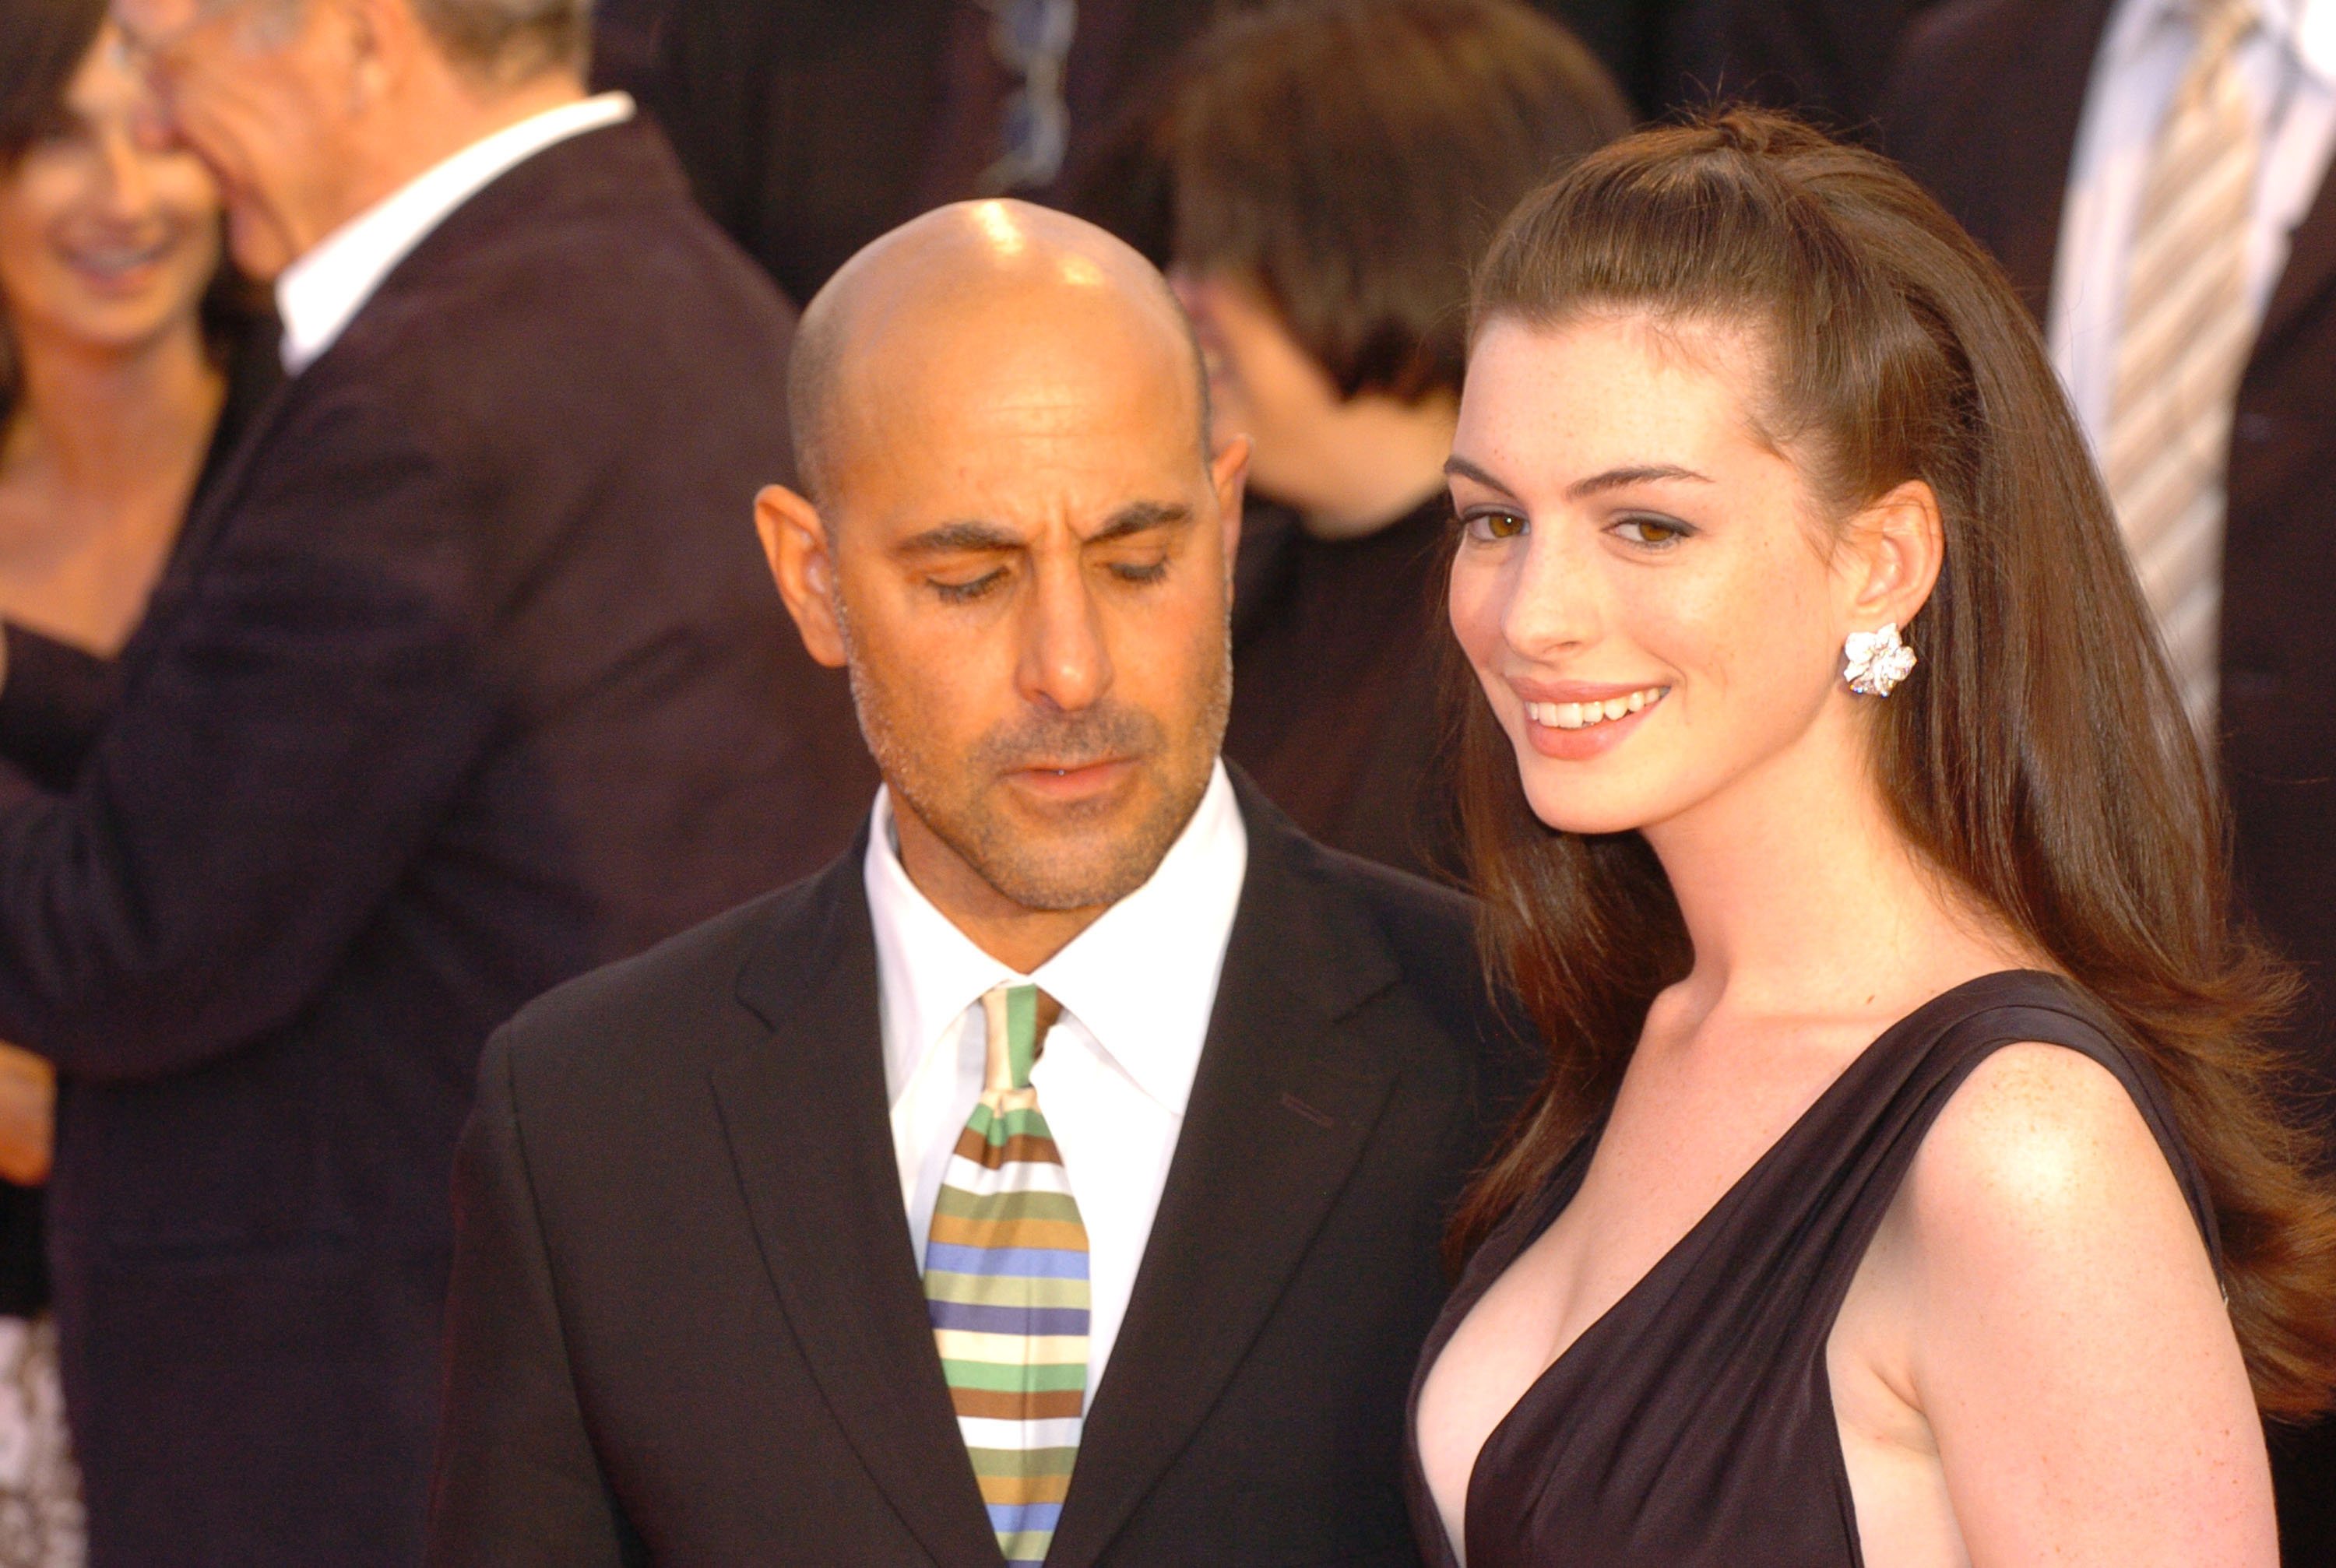 Anne Hathaway and Stanley Tucci pictured at "The Devil Wears Prada" premiere, 2006. | Photo: Getty Images